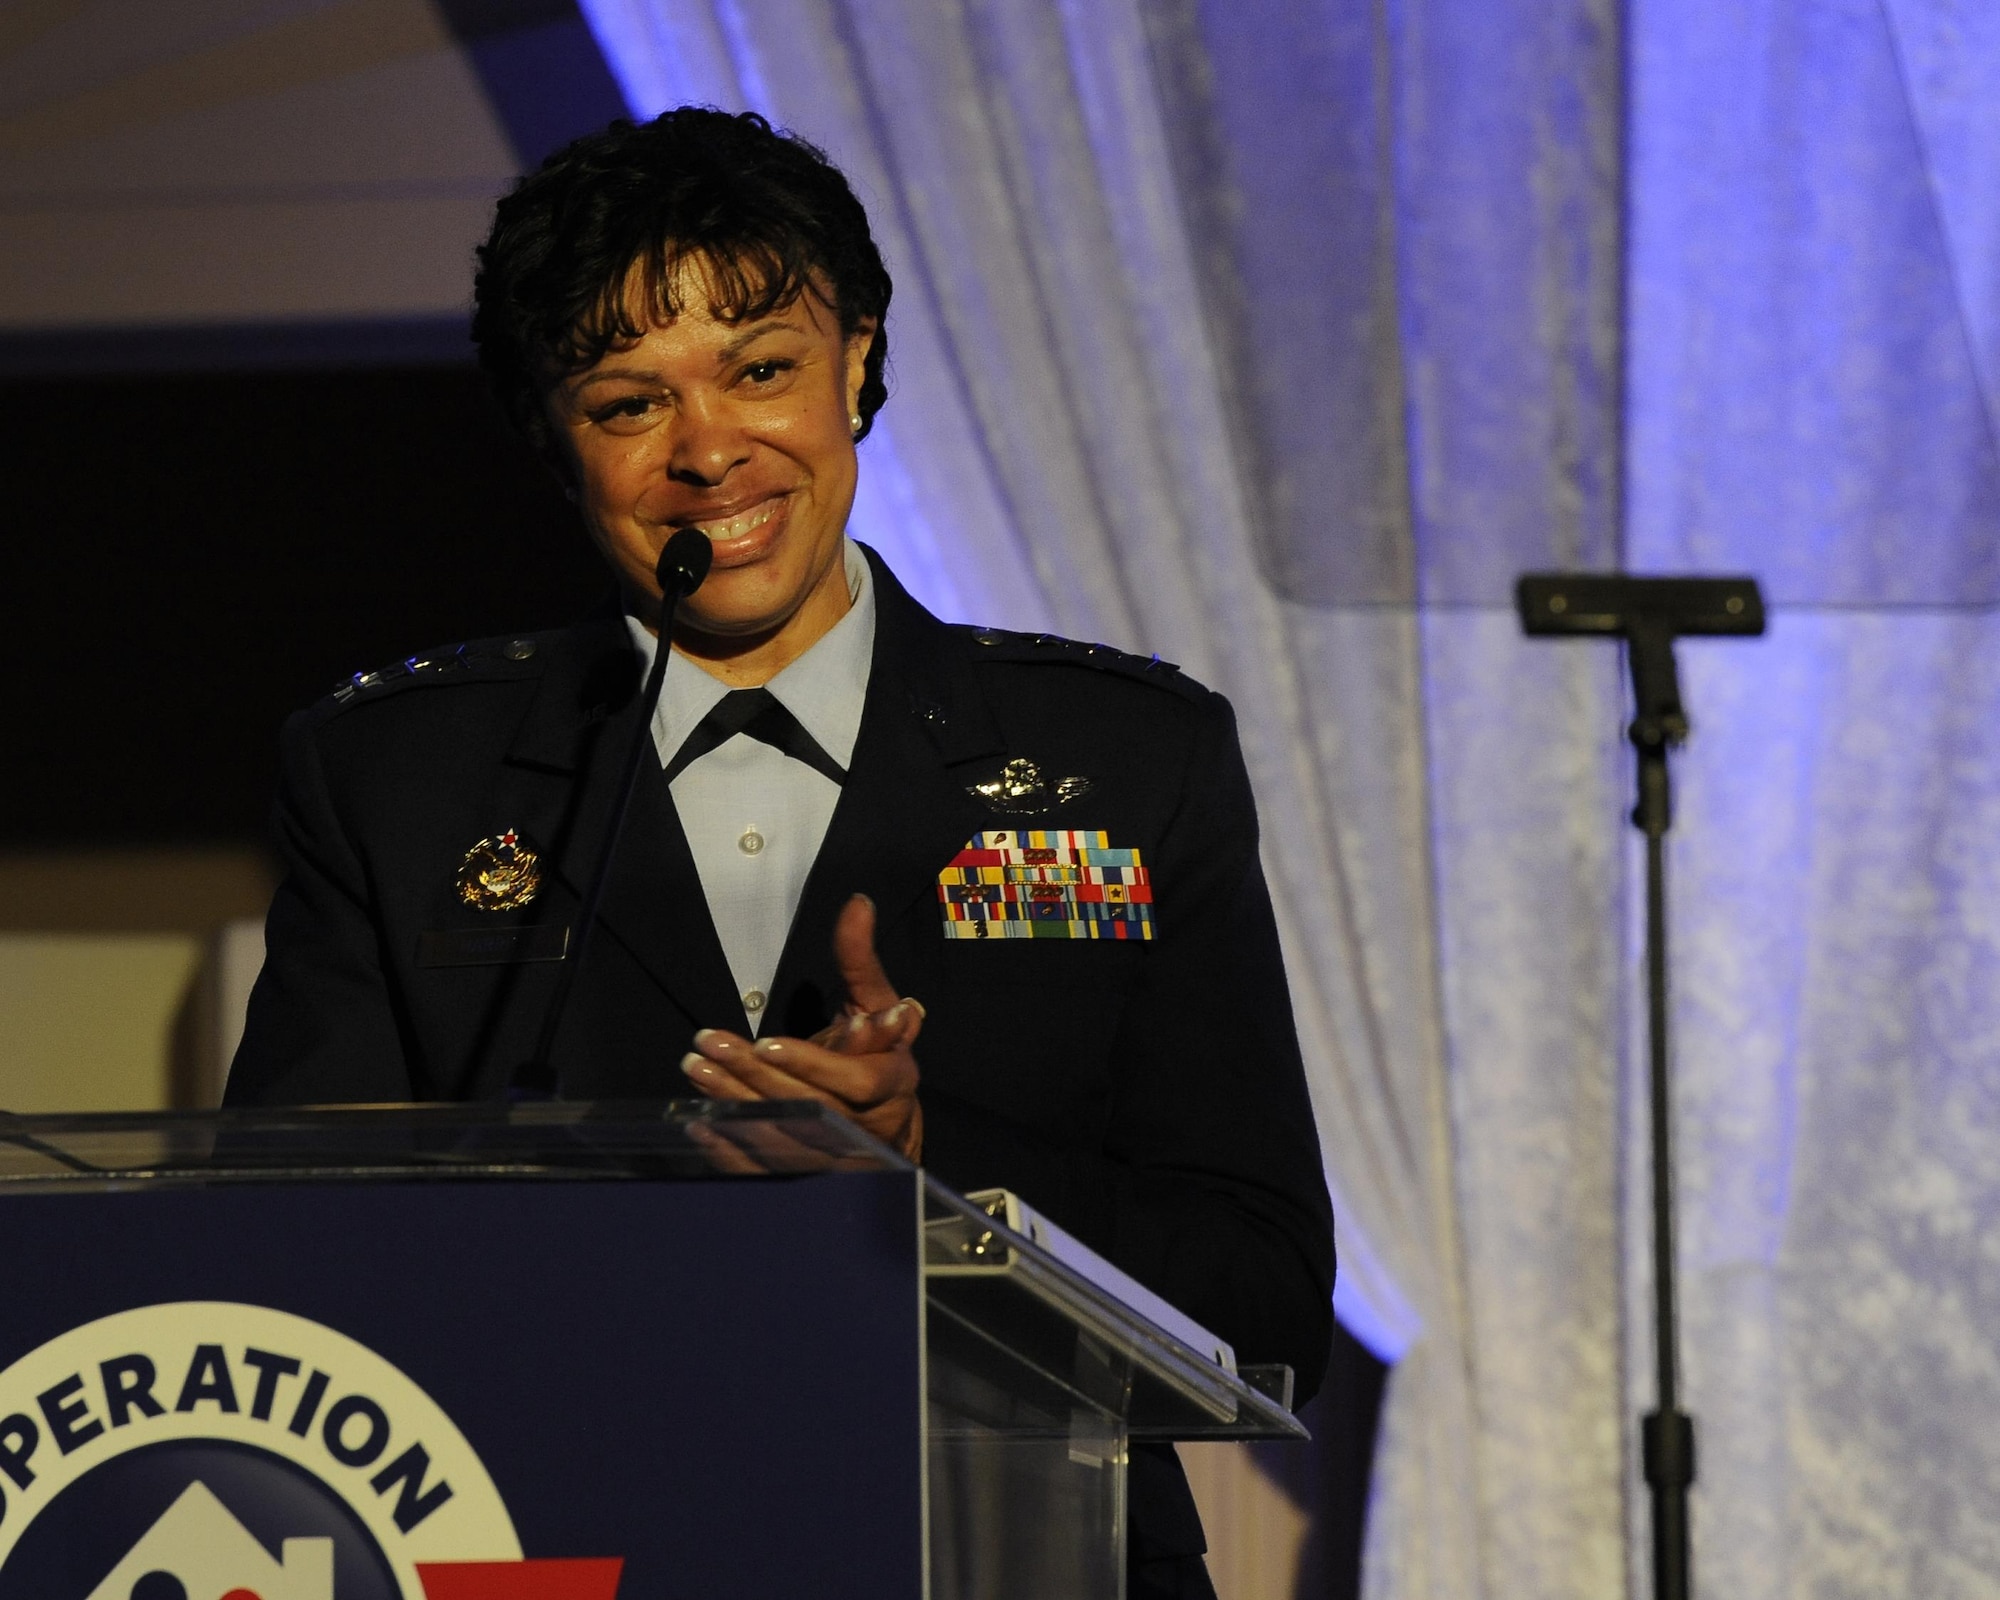 Air Force Assistant Vice Chief of Staff Lt. Gen. Stayce Harris speaks at the Military Child of the Year Award gala in Pentagon City, Va., April 6, 2017. The annual event celebrates military children who demonstrate leadership, resilience and strength of character, as well as an ability to thrive when dealing with the challenges inherent in military family life. (U.S. Air Force photo/Staff Sgt. Jannelle McRae)